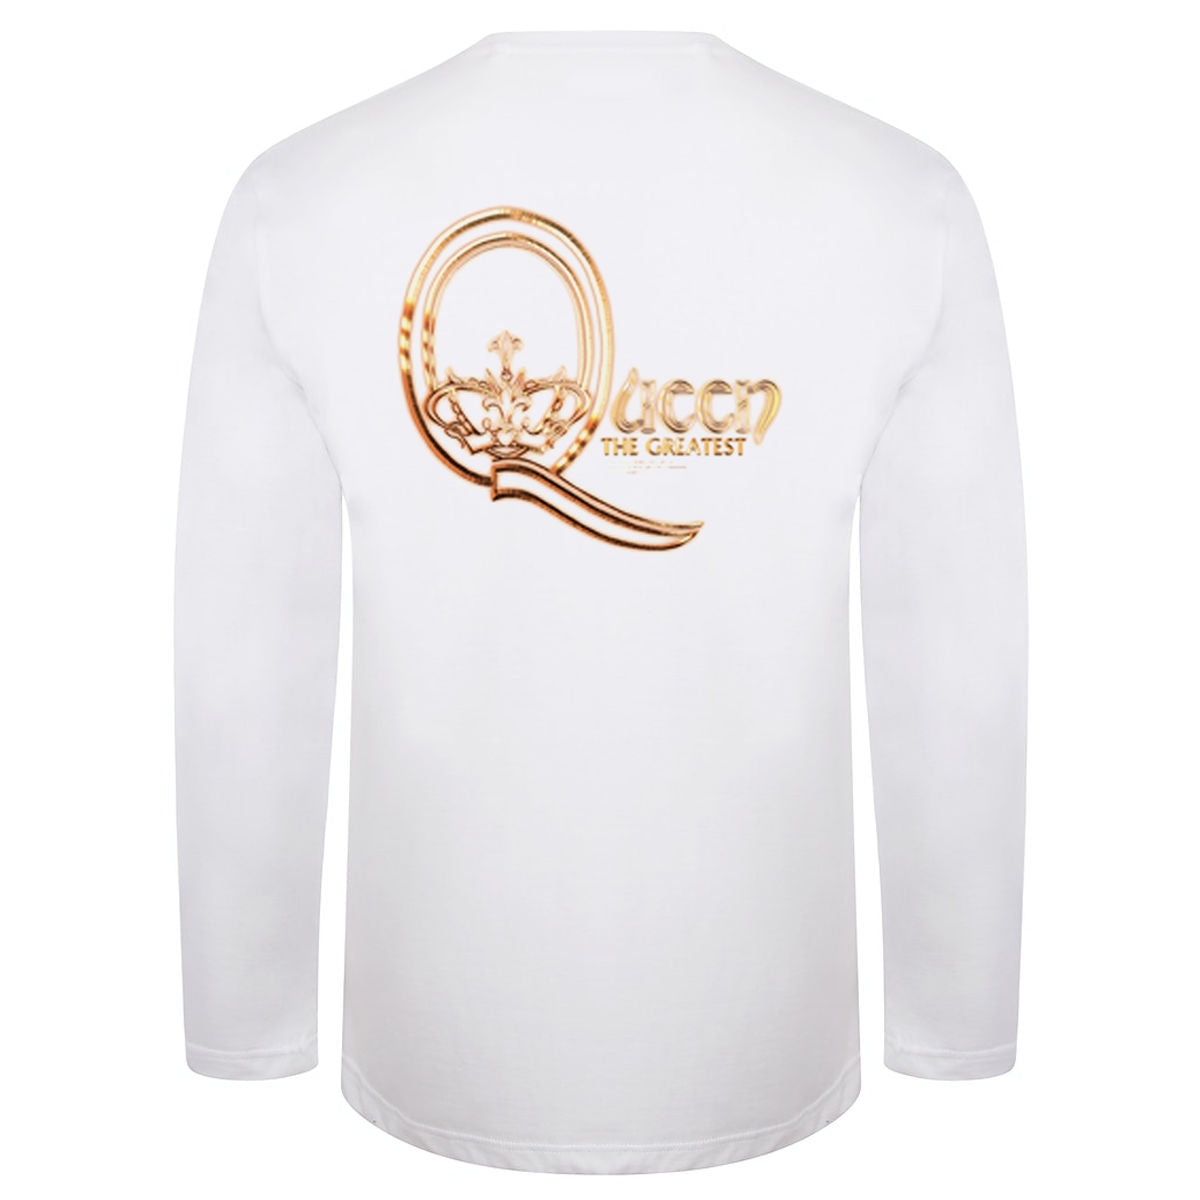 Queen - The Greatest Long Sleeve T-Shirt